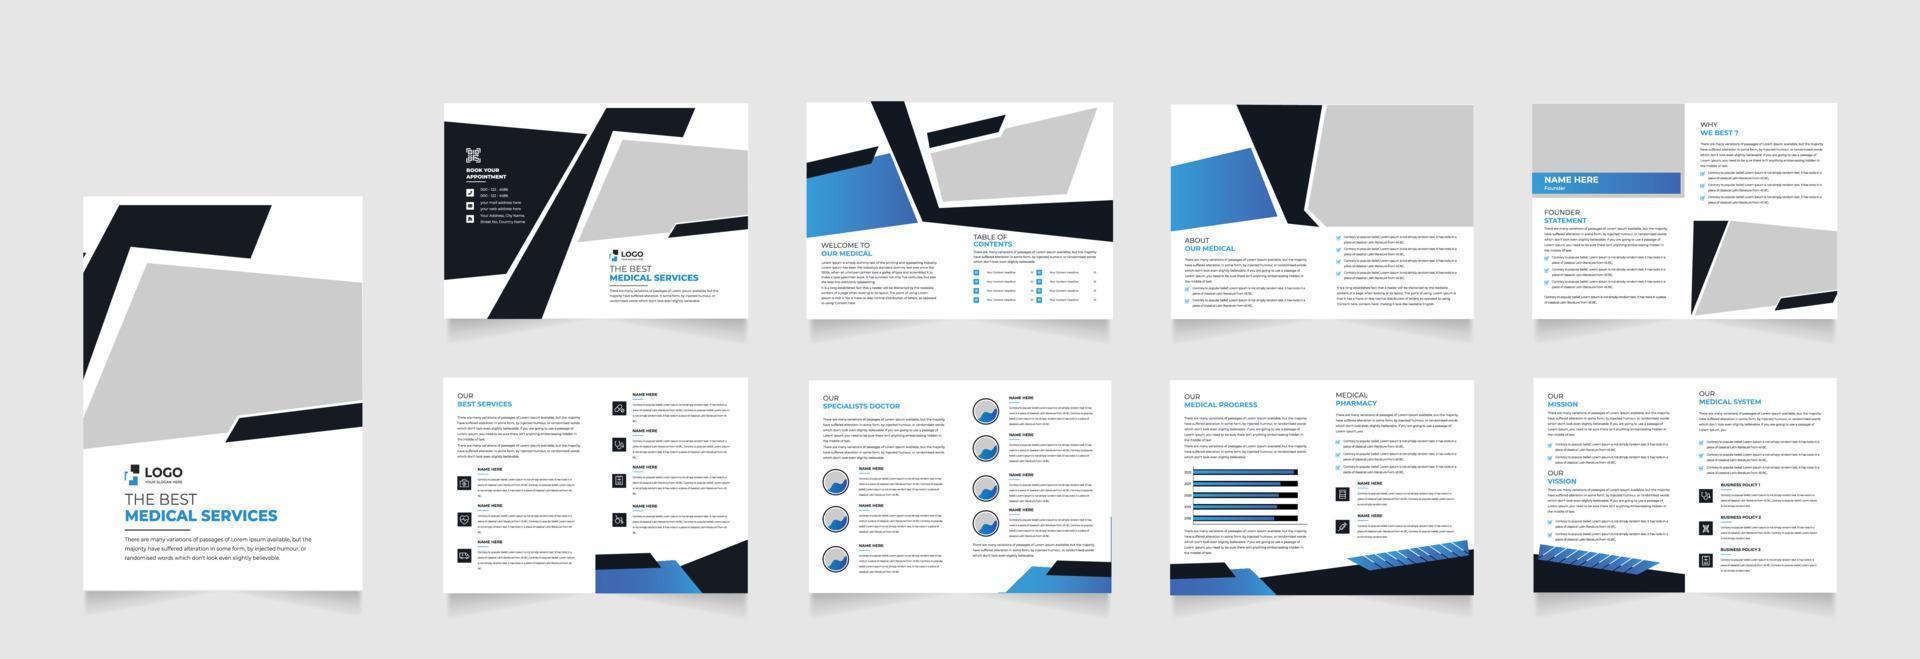 16 Page landscape medical health care dental corporate business brochure and annual report design vector